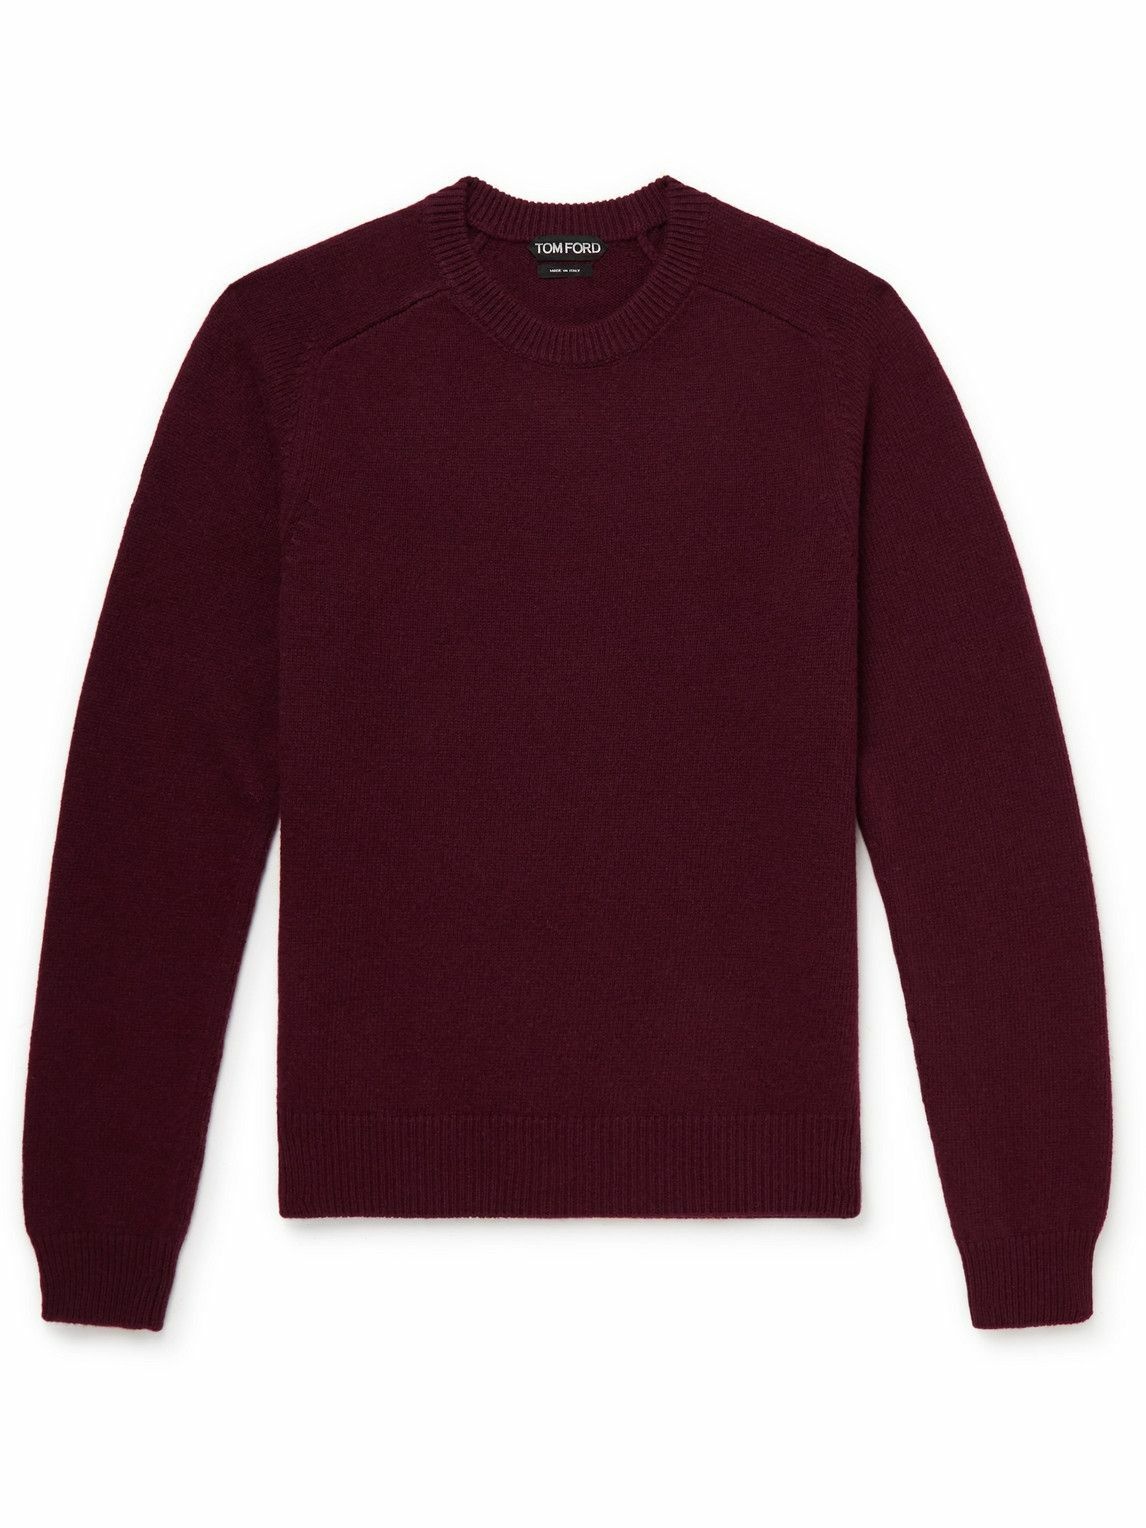 TOM FORD - Cashmere Sweater - Burgundy TOM FORD